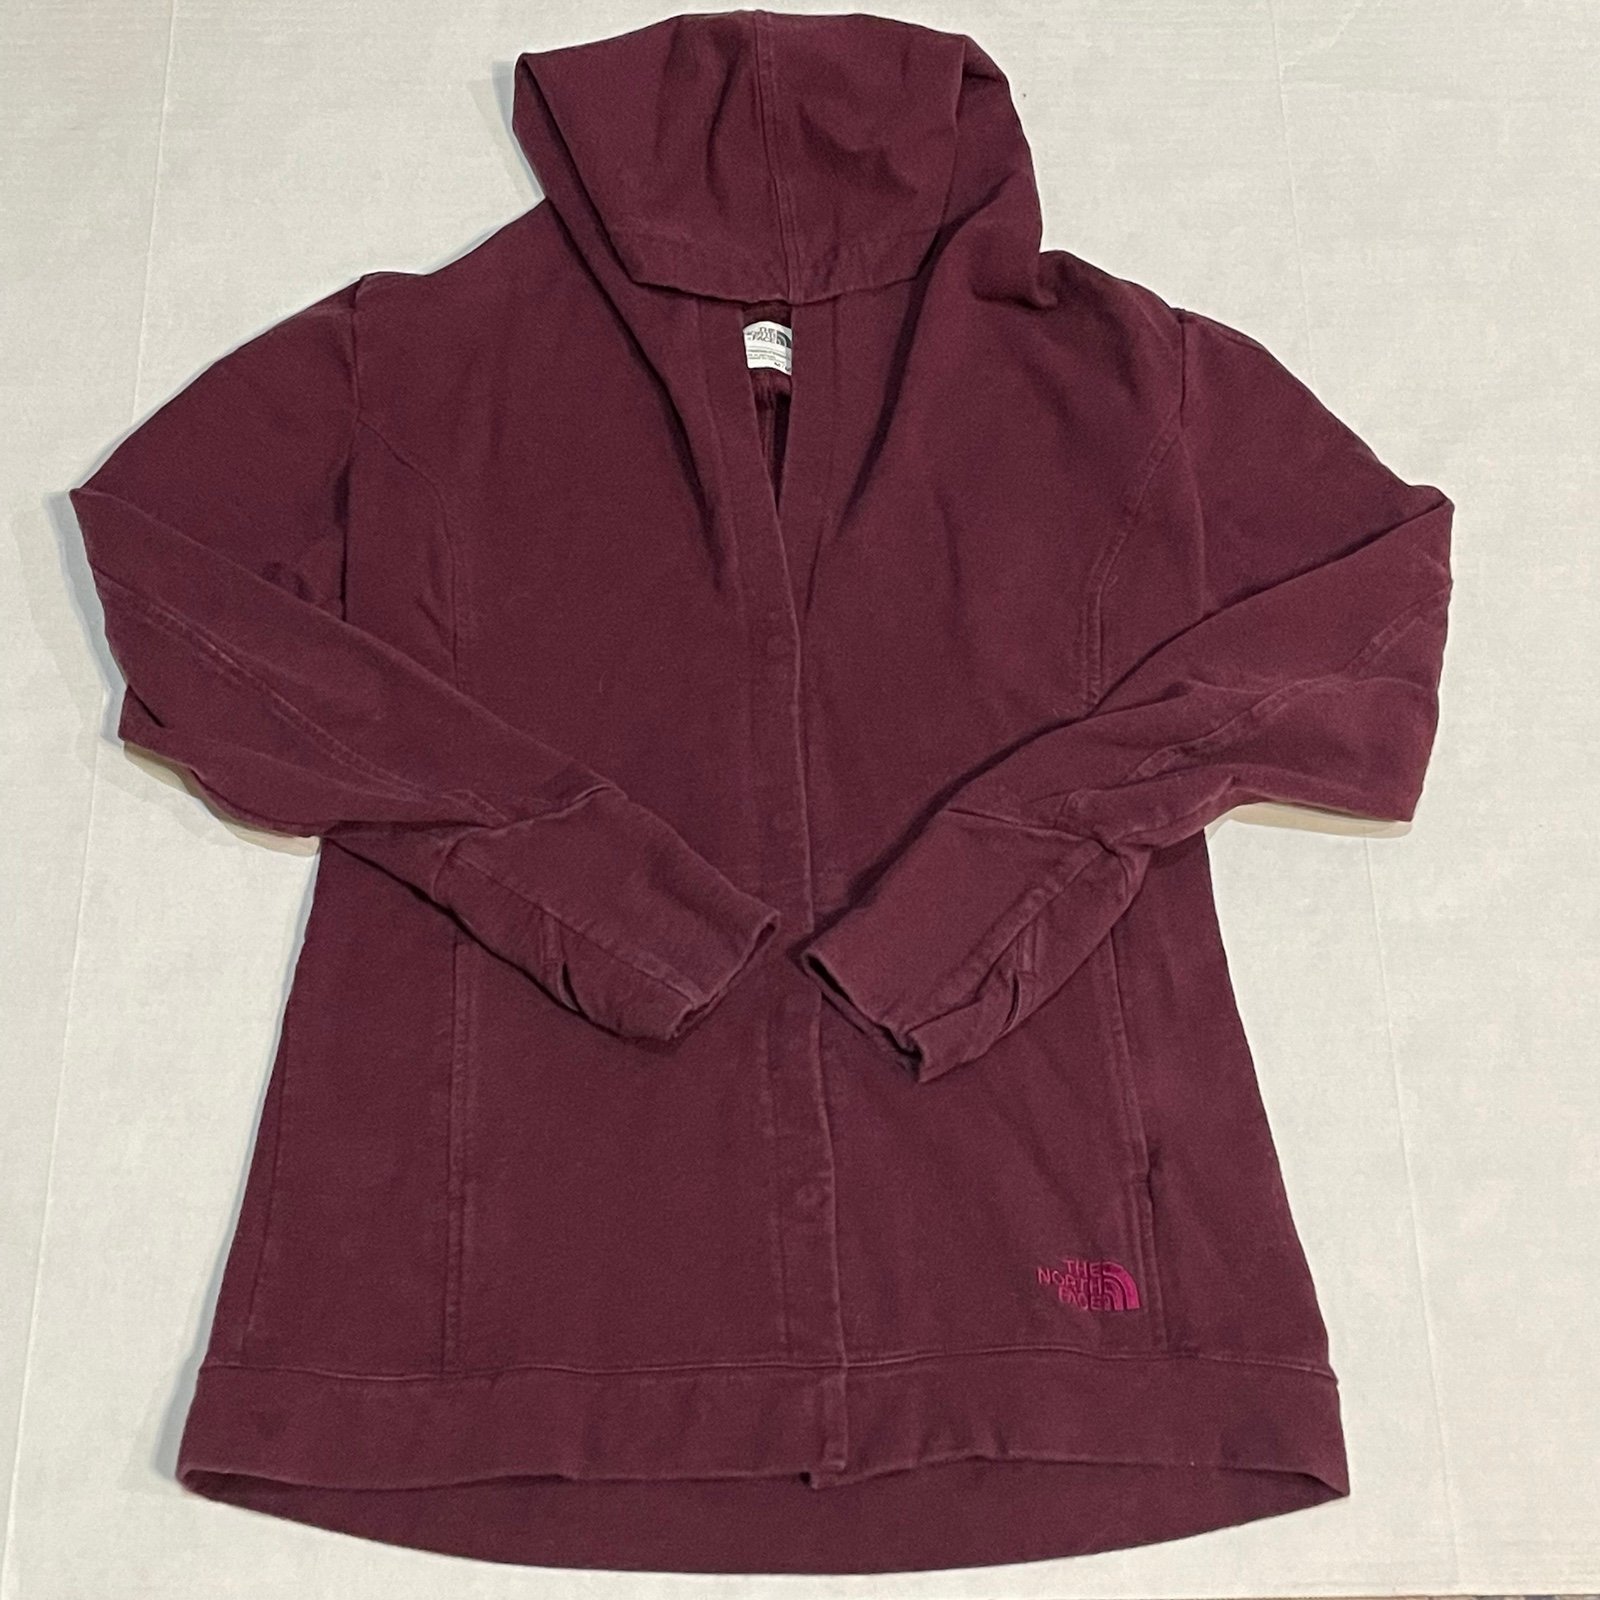 Comfortable The North Face Women´s Button Up Hoodie Jacket Sweater Maroon Size Med iRtROCUkx hot sale